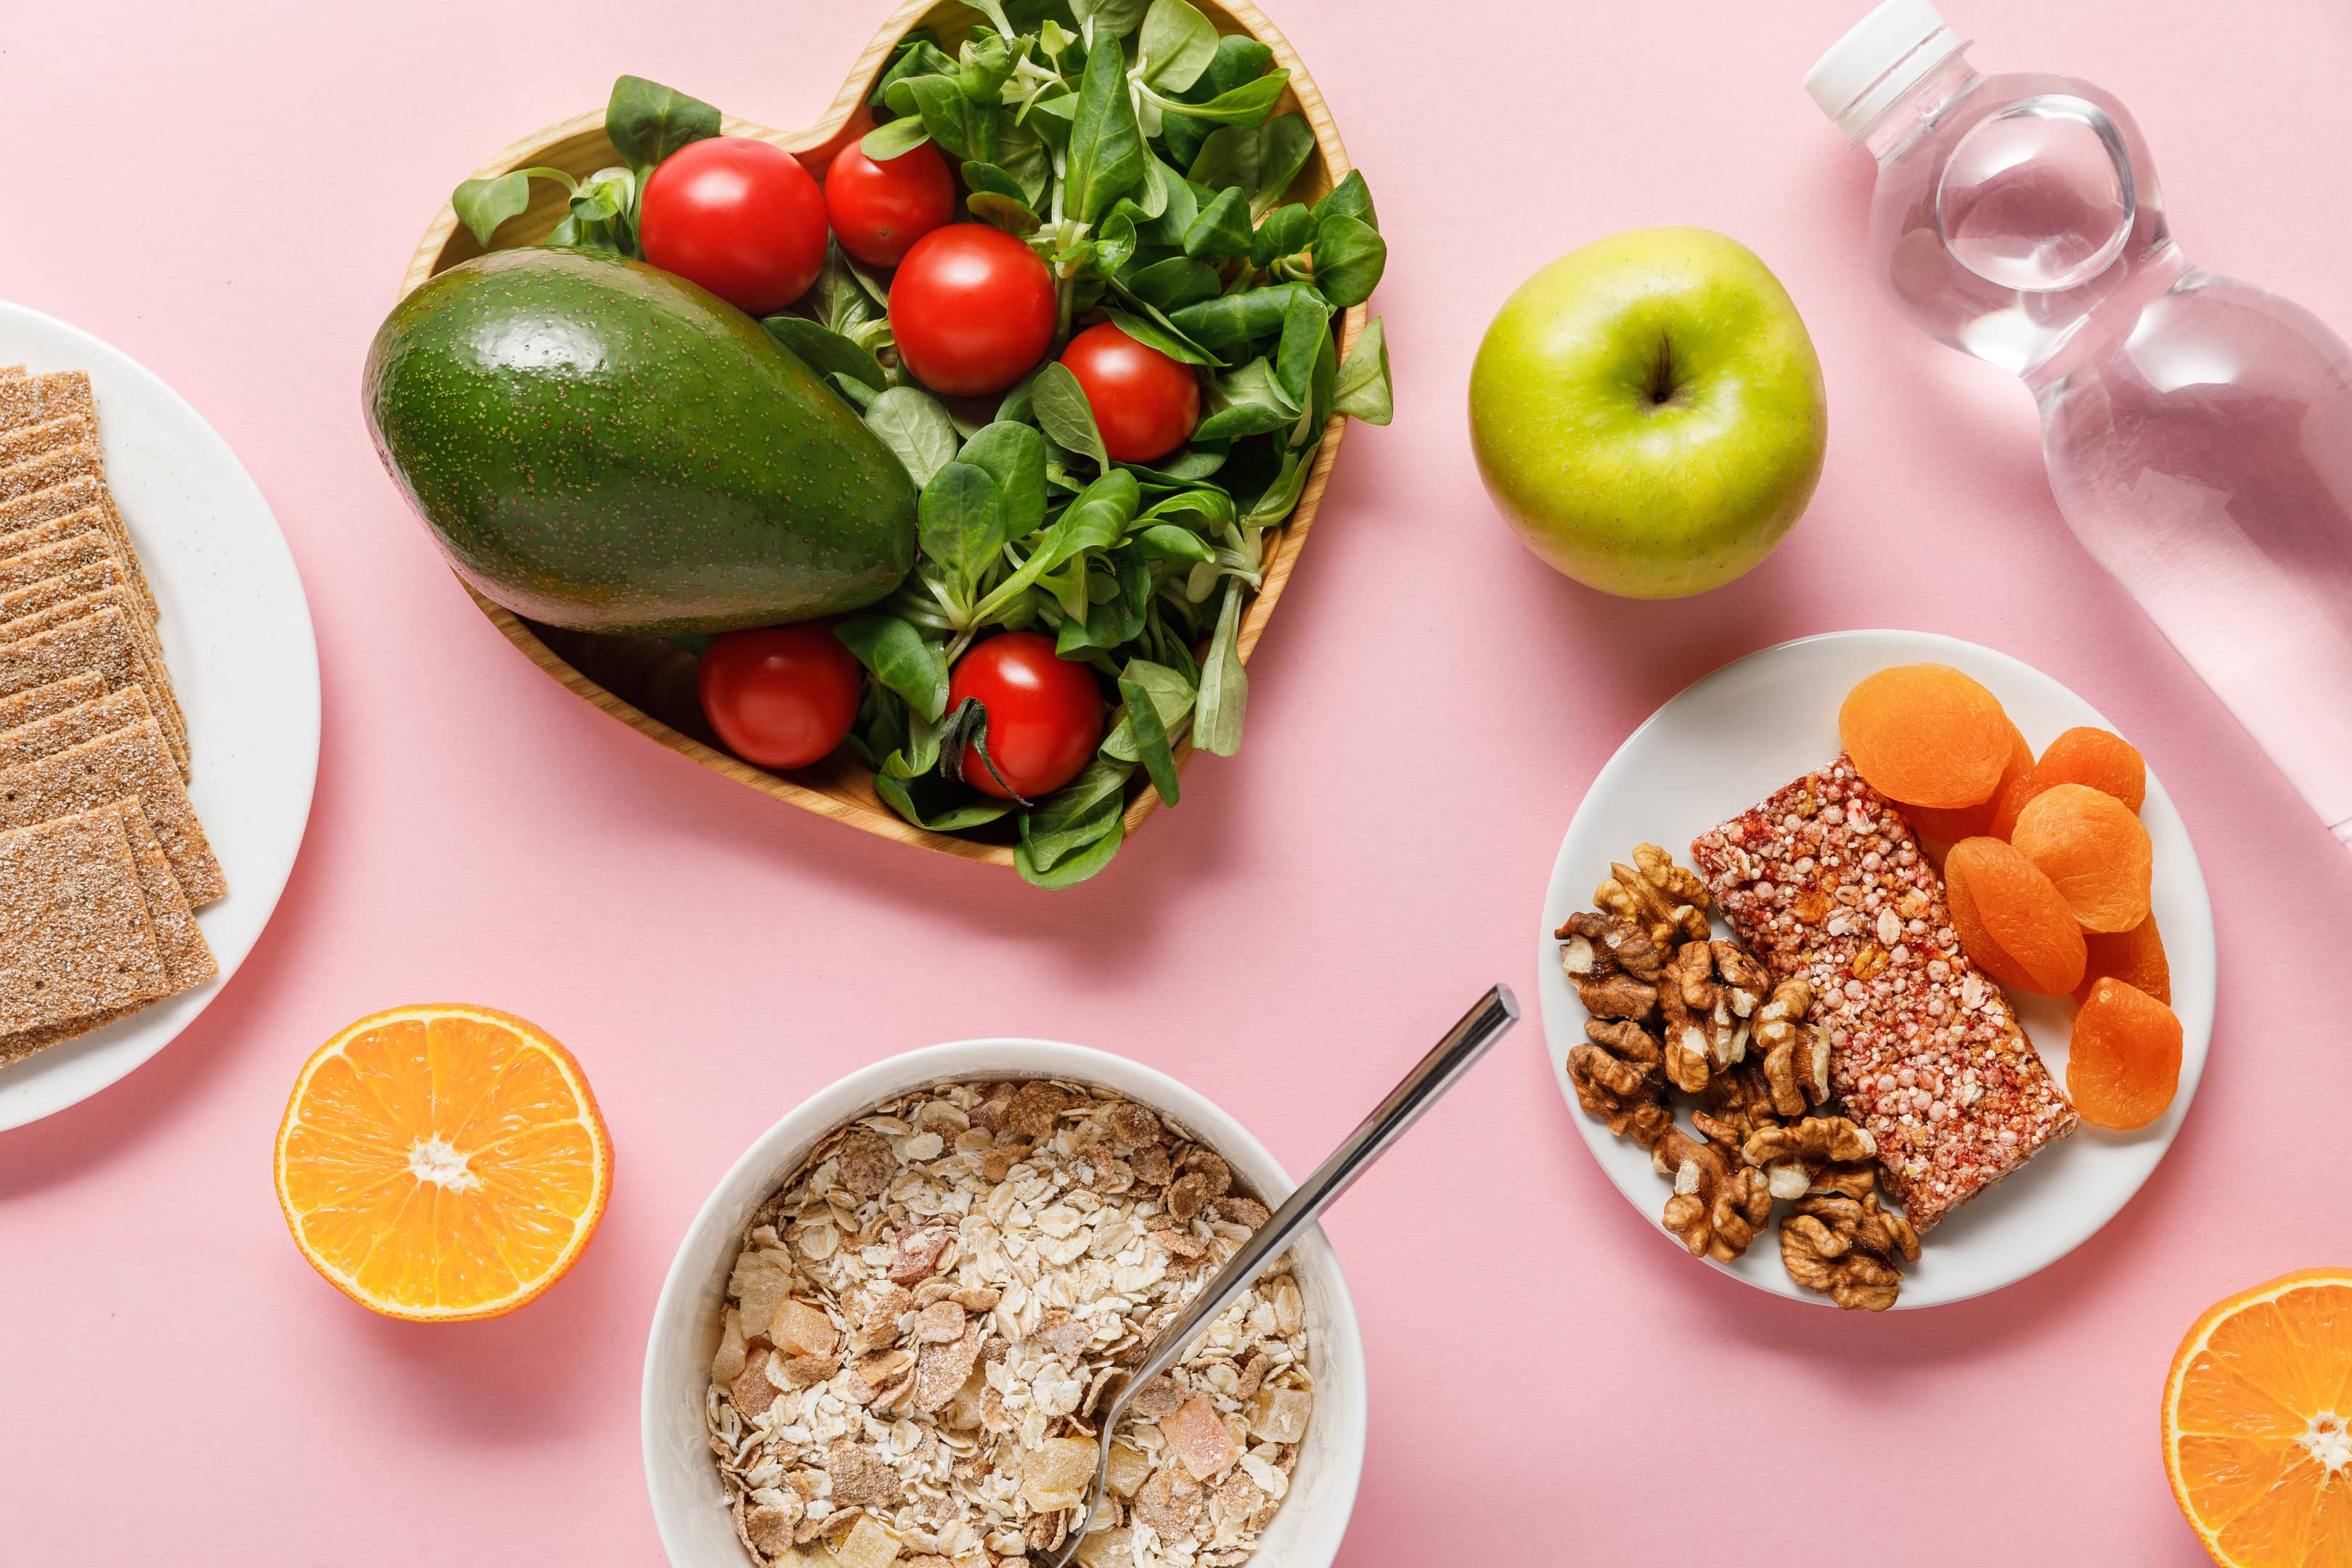 Top view of fresh diet food and water on pink background